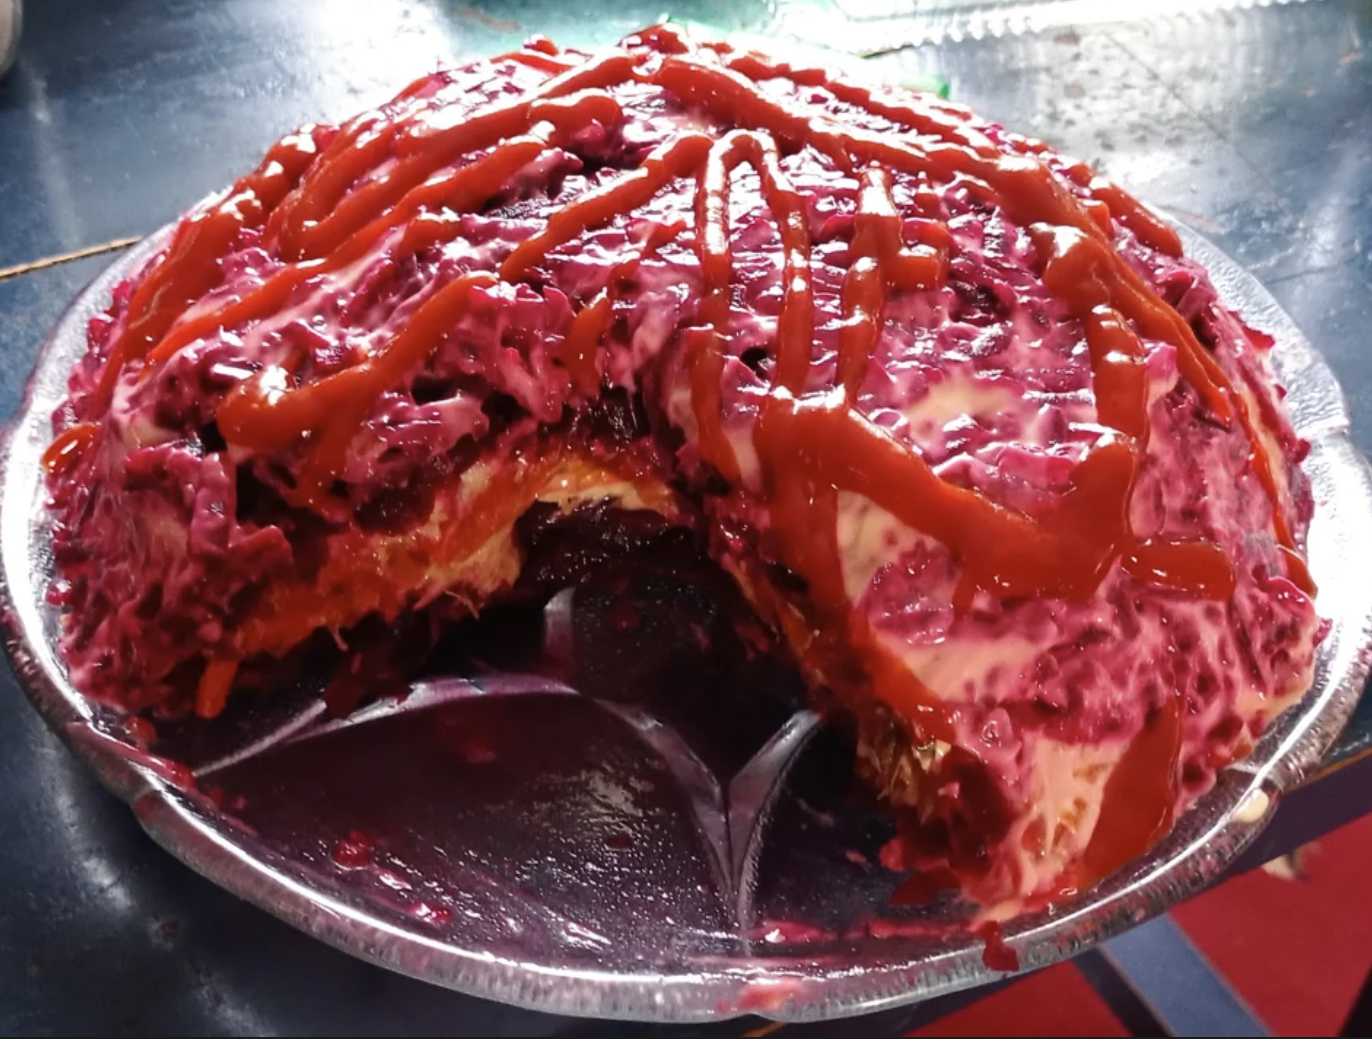 A beet cake is made with &quot;ketchup&quot; icing